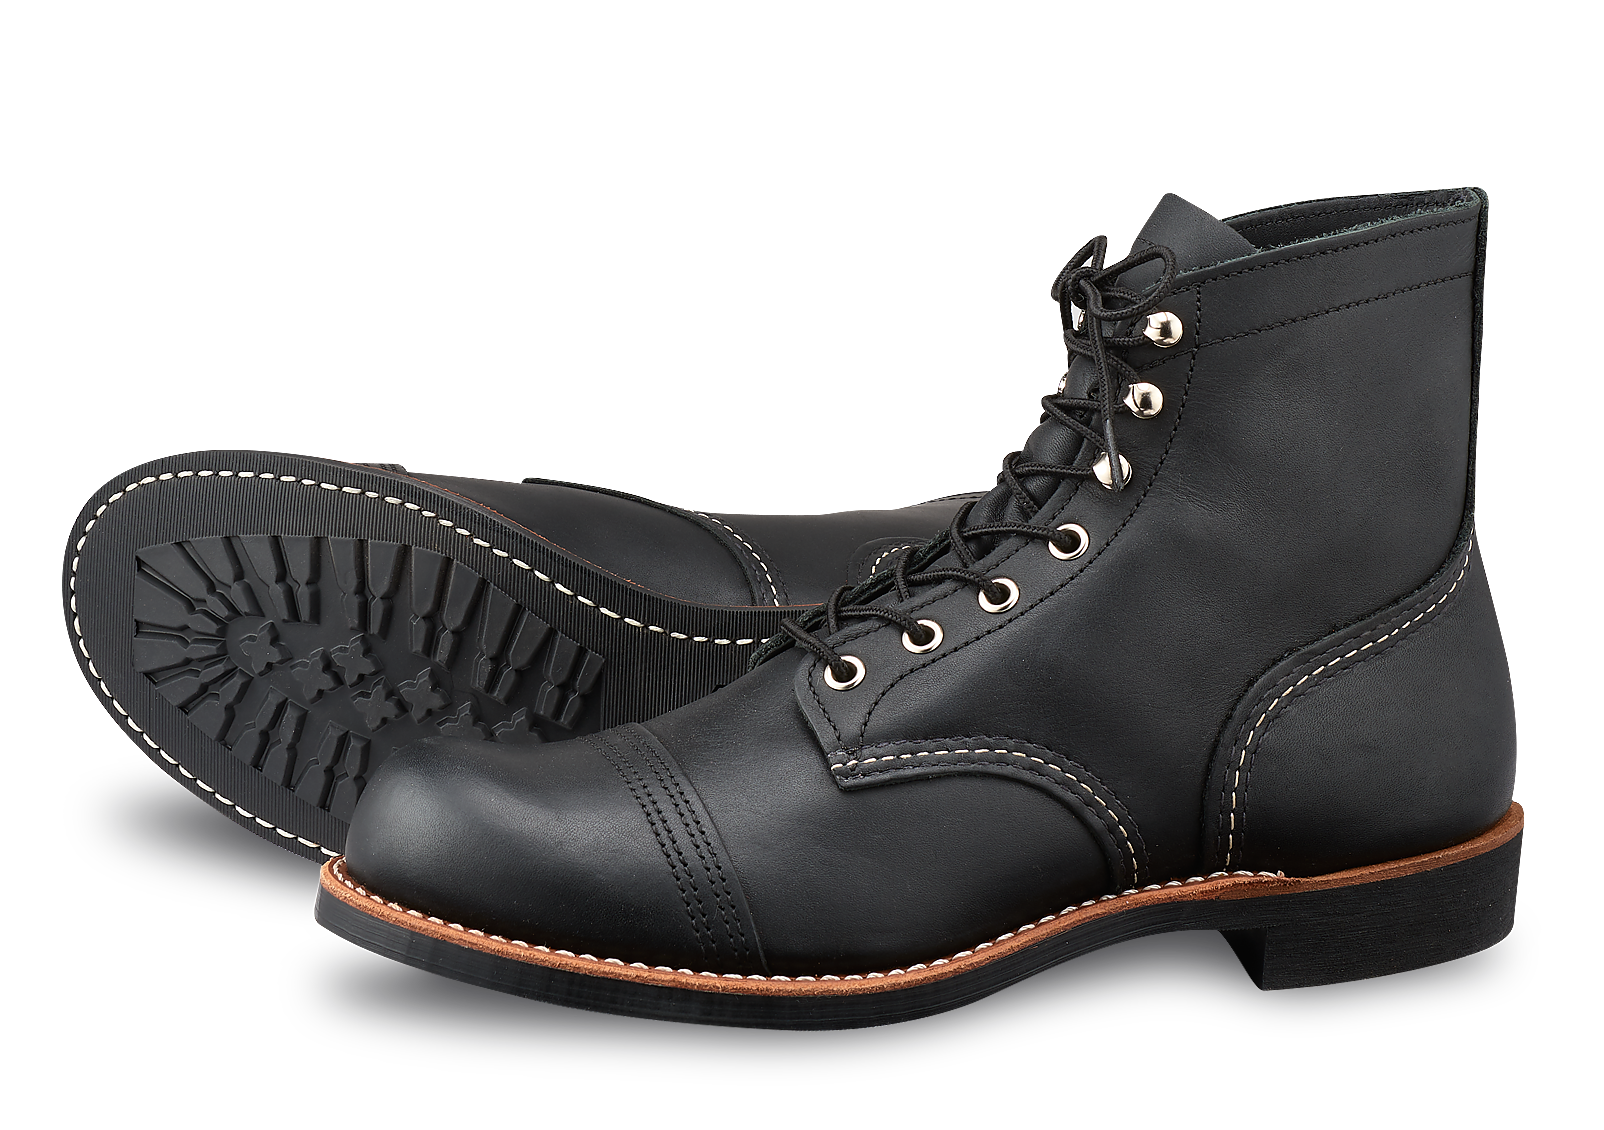 Preview: Red Wing 8084 Iron Ranger.